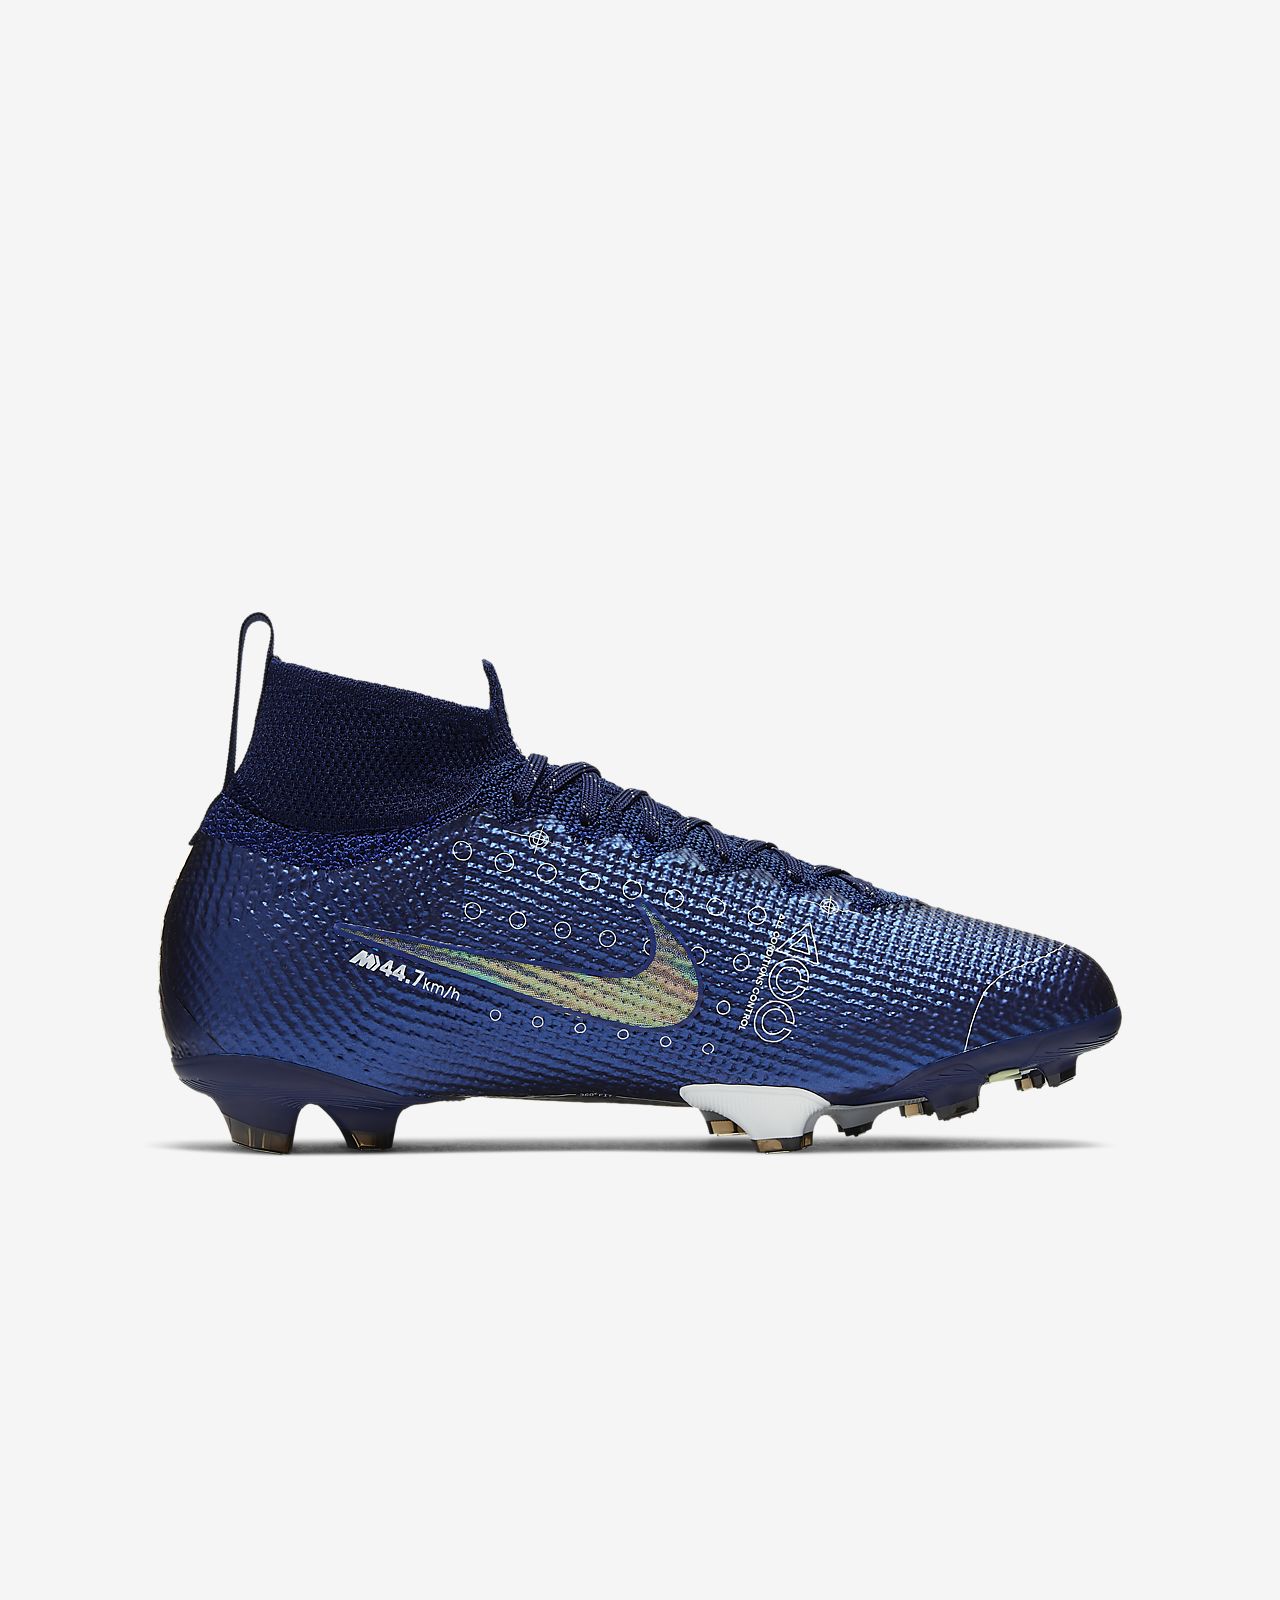 Nike Mercurial Superfly 6 Pro AG PRO Raised on on on Concrete